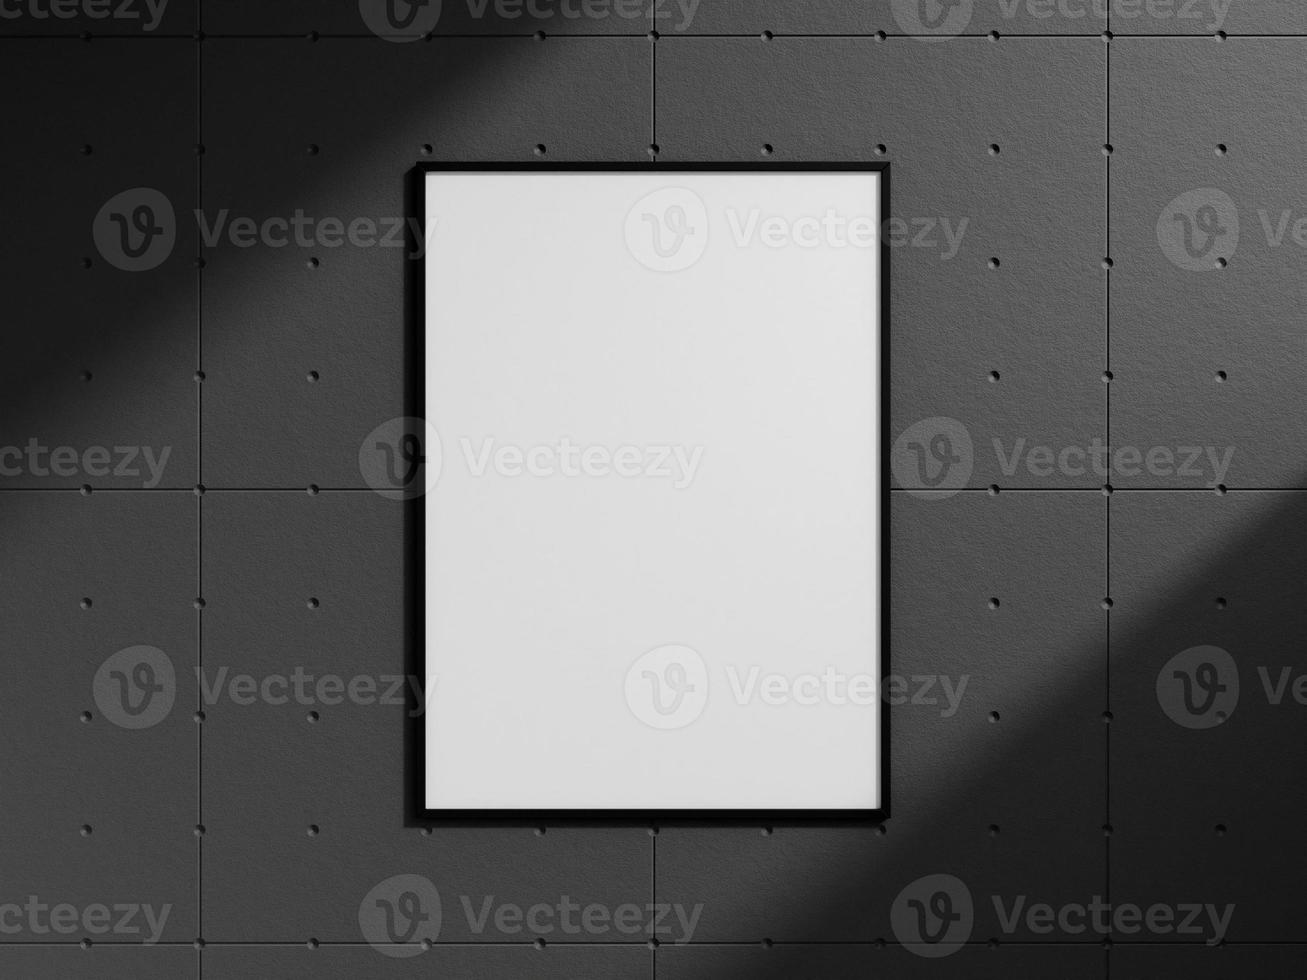 Clean and minimalist front view portrait black photo or poster frame mockup hanging on the industrial brick wall with shadow. 3d rendering.